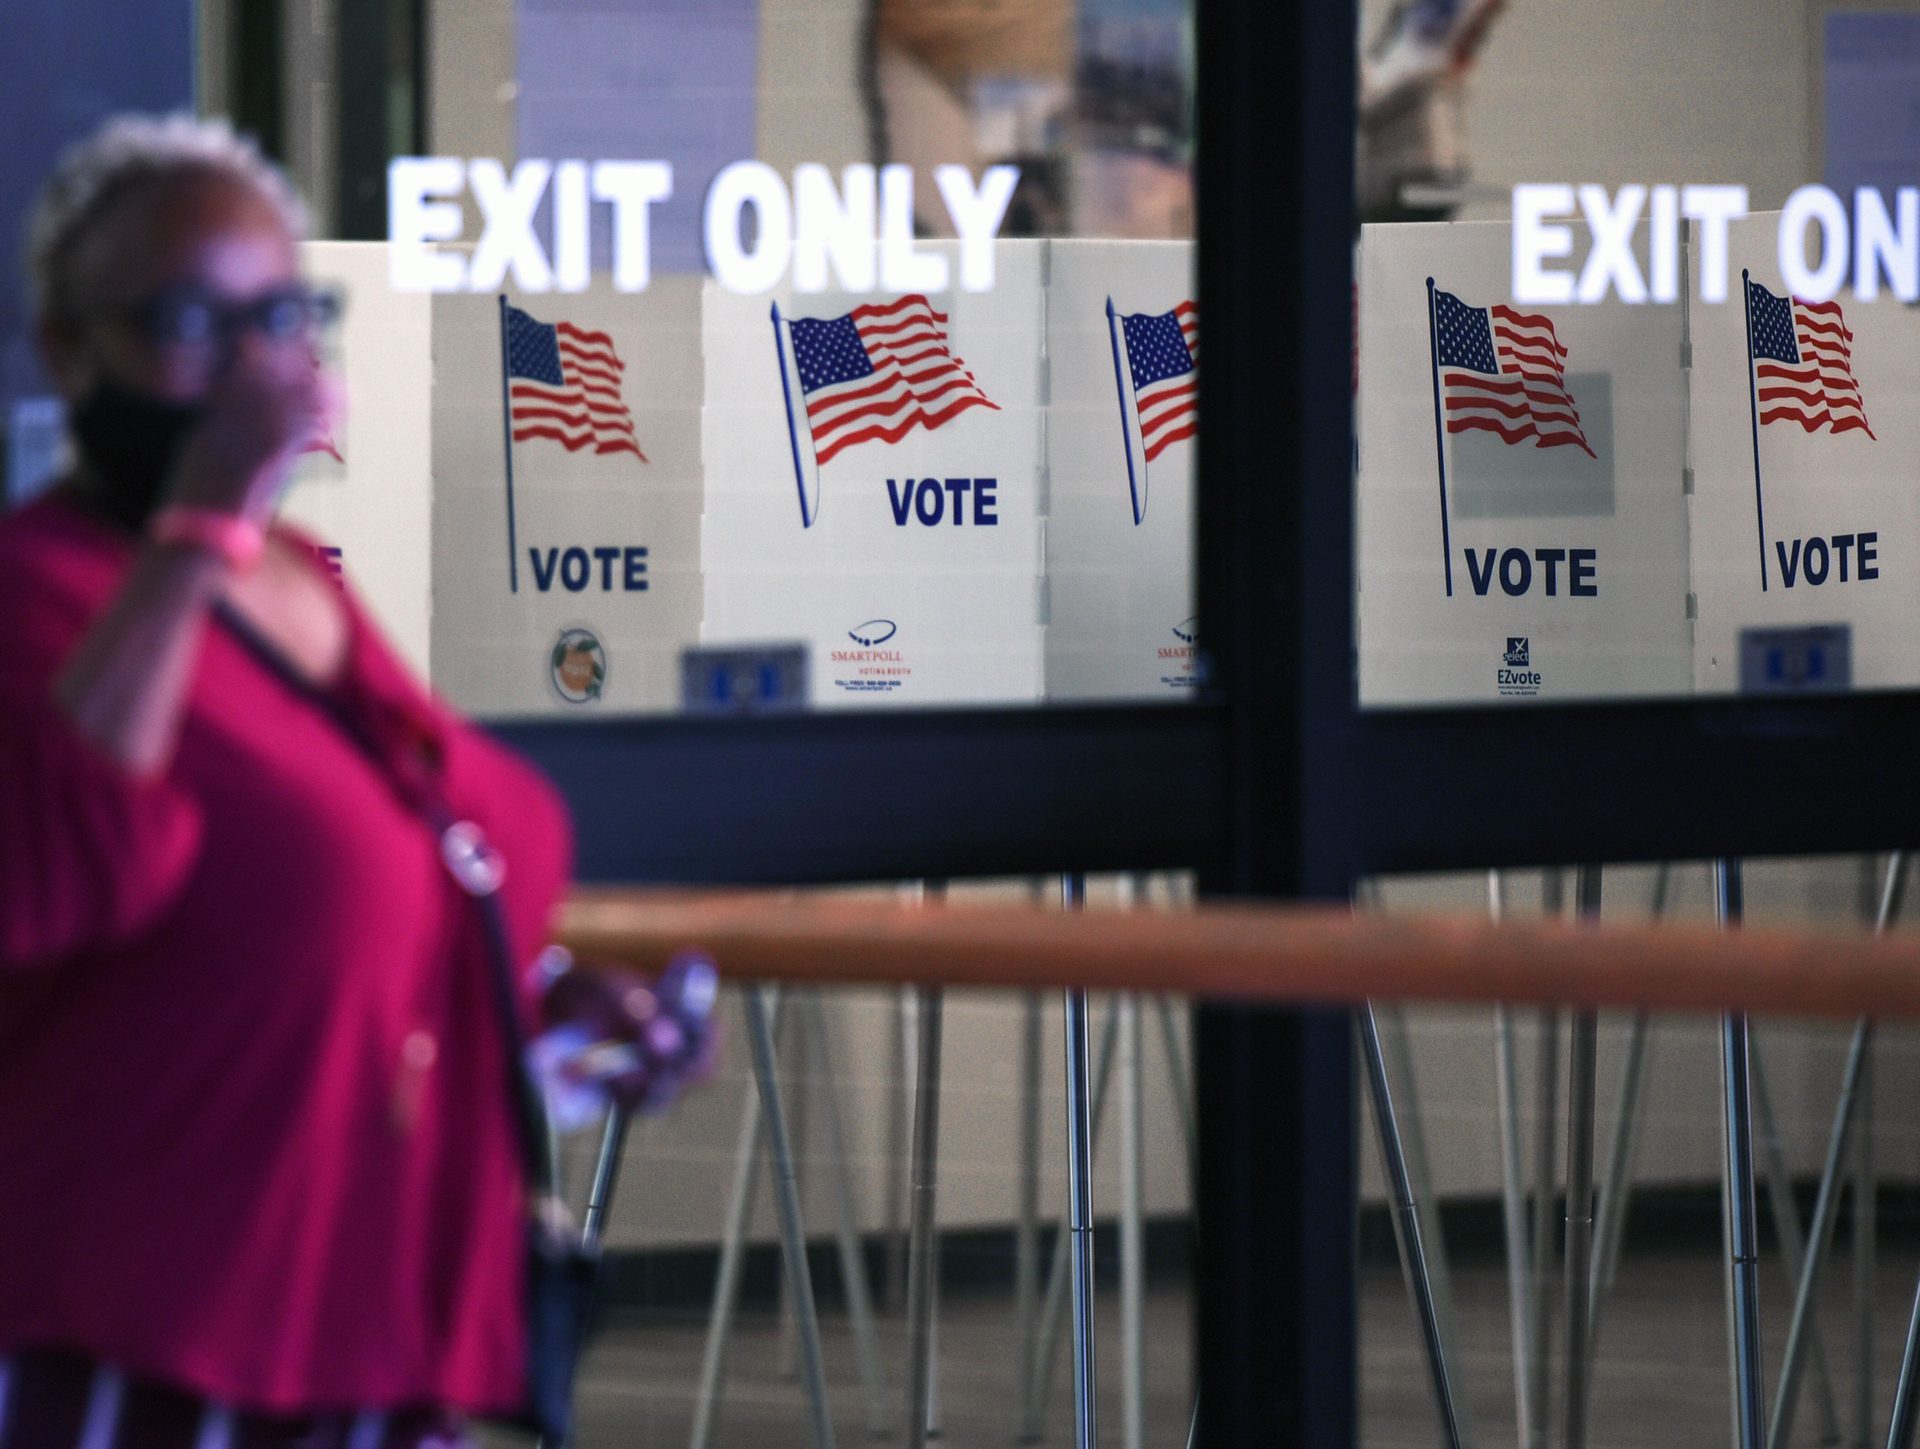 A woman leaves the Orange County Supervisor of Elections Office on the first day of early voting in the 2022 US midterm elections in Orlando